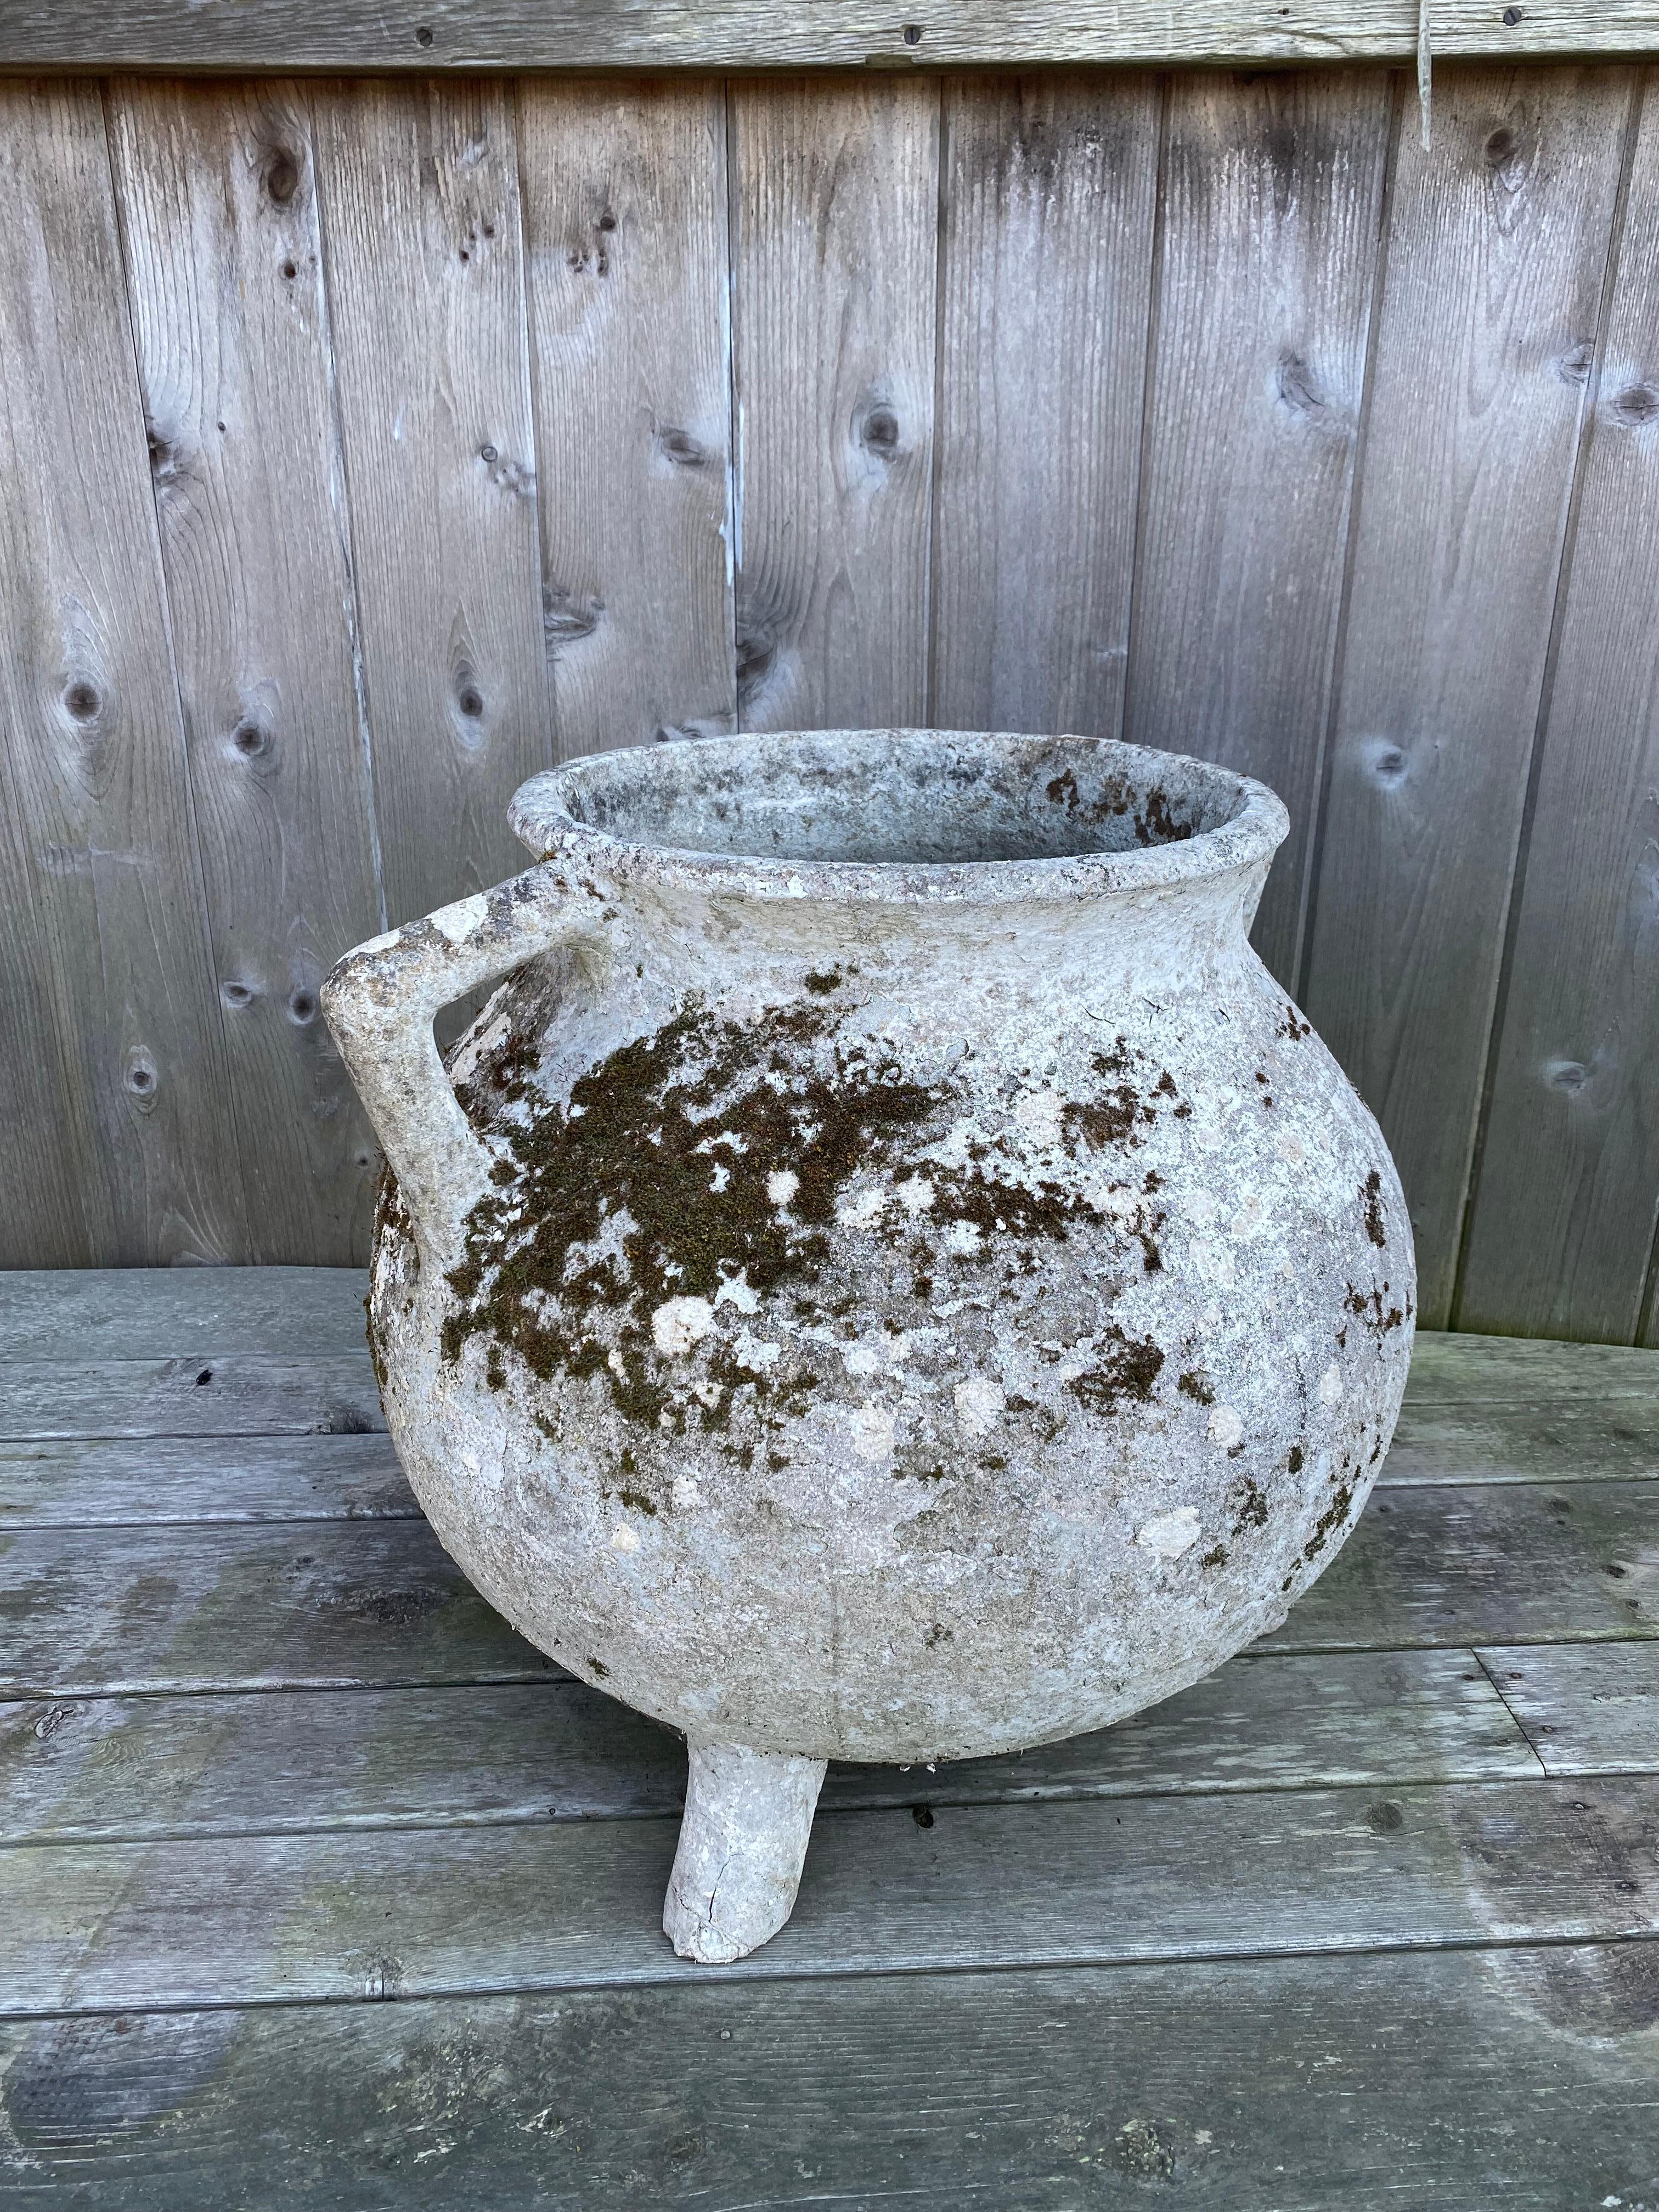 Willy Guhl Cauldron, or urn, planter. Both handles are fully intact and secure. Beautiful decay of a 70+ year life accented with natural moss growth.

One foot has minor cracking but does not affect structure in any way.

3 holes for draining.